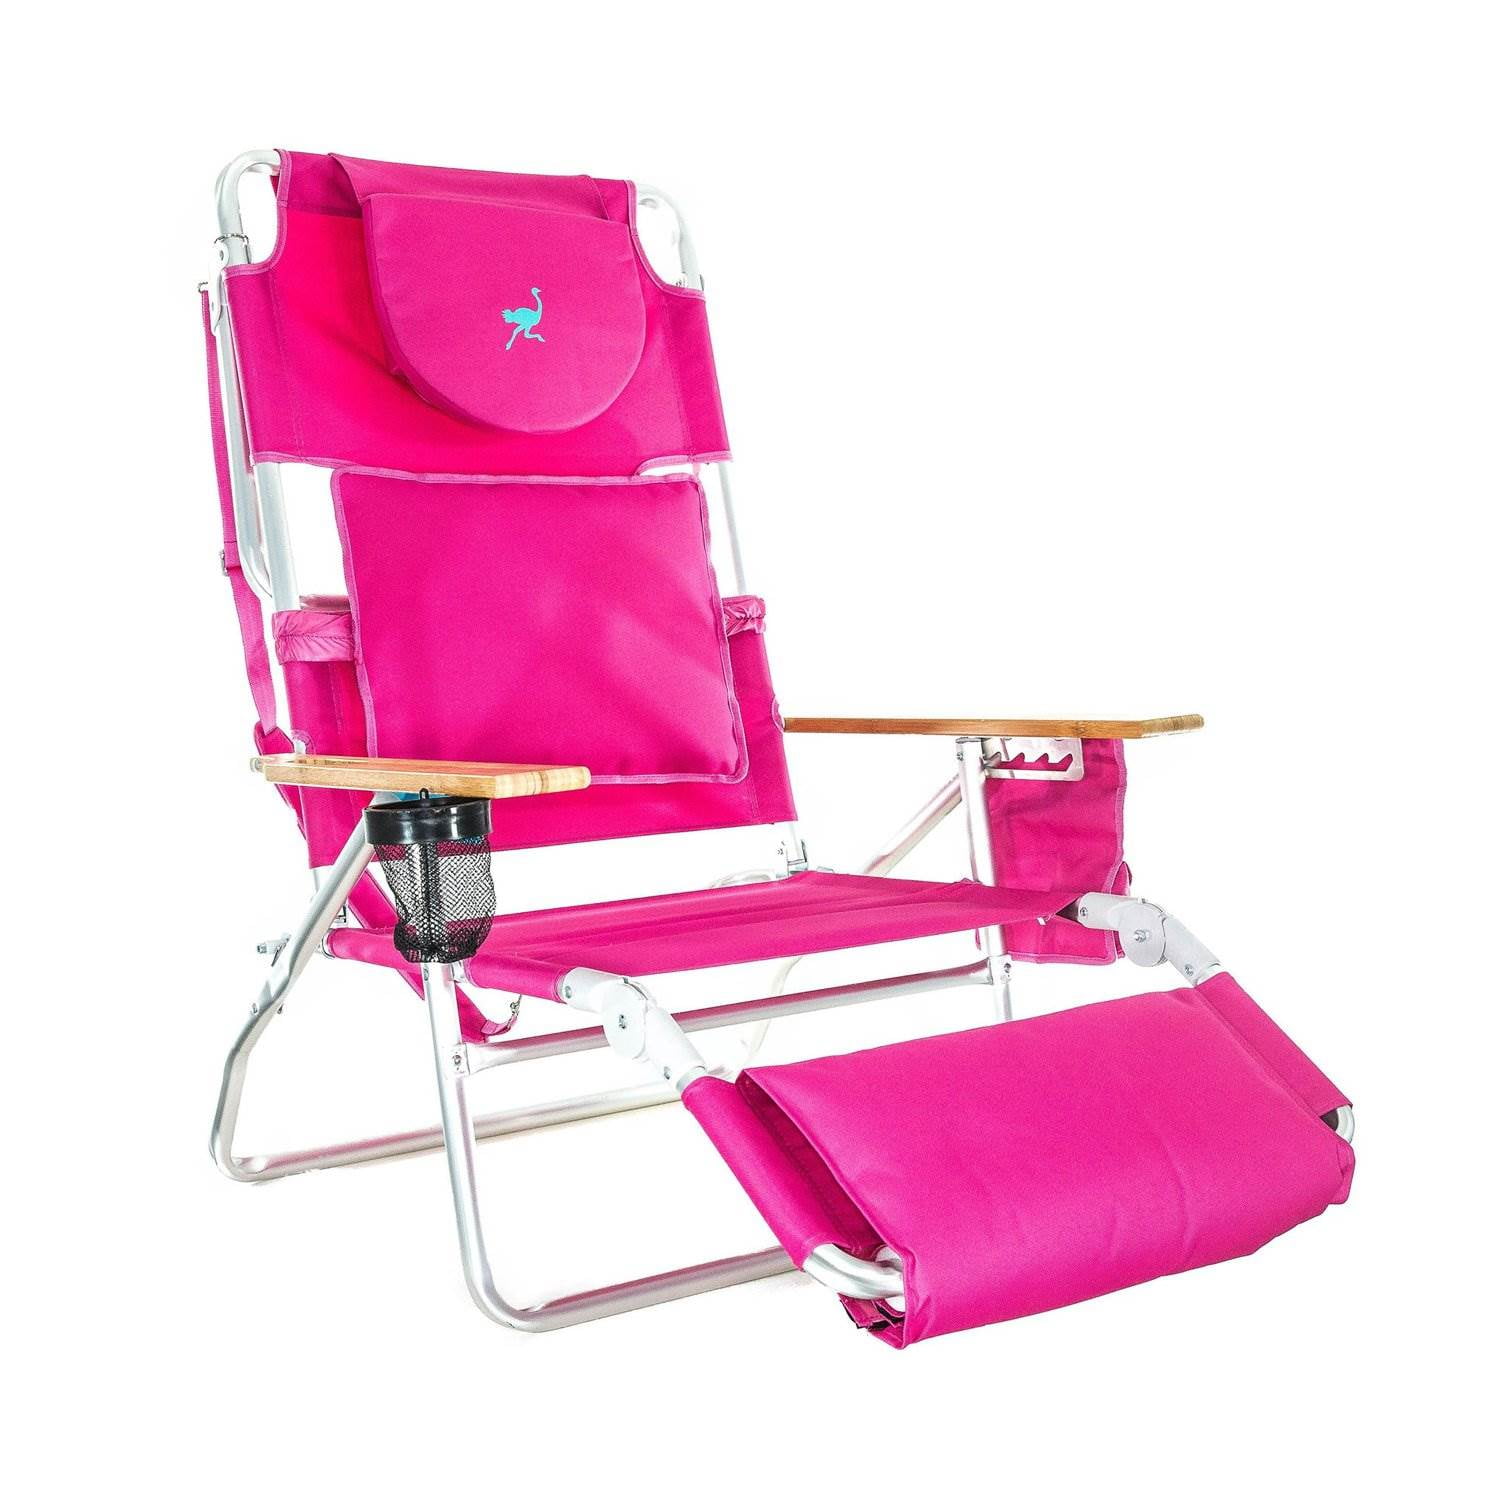 Unique 3 In 1 Reclining Beach Chair for Small Space